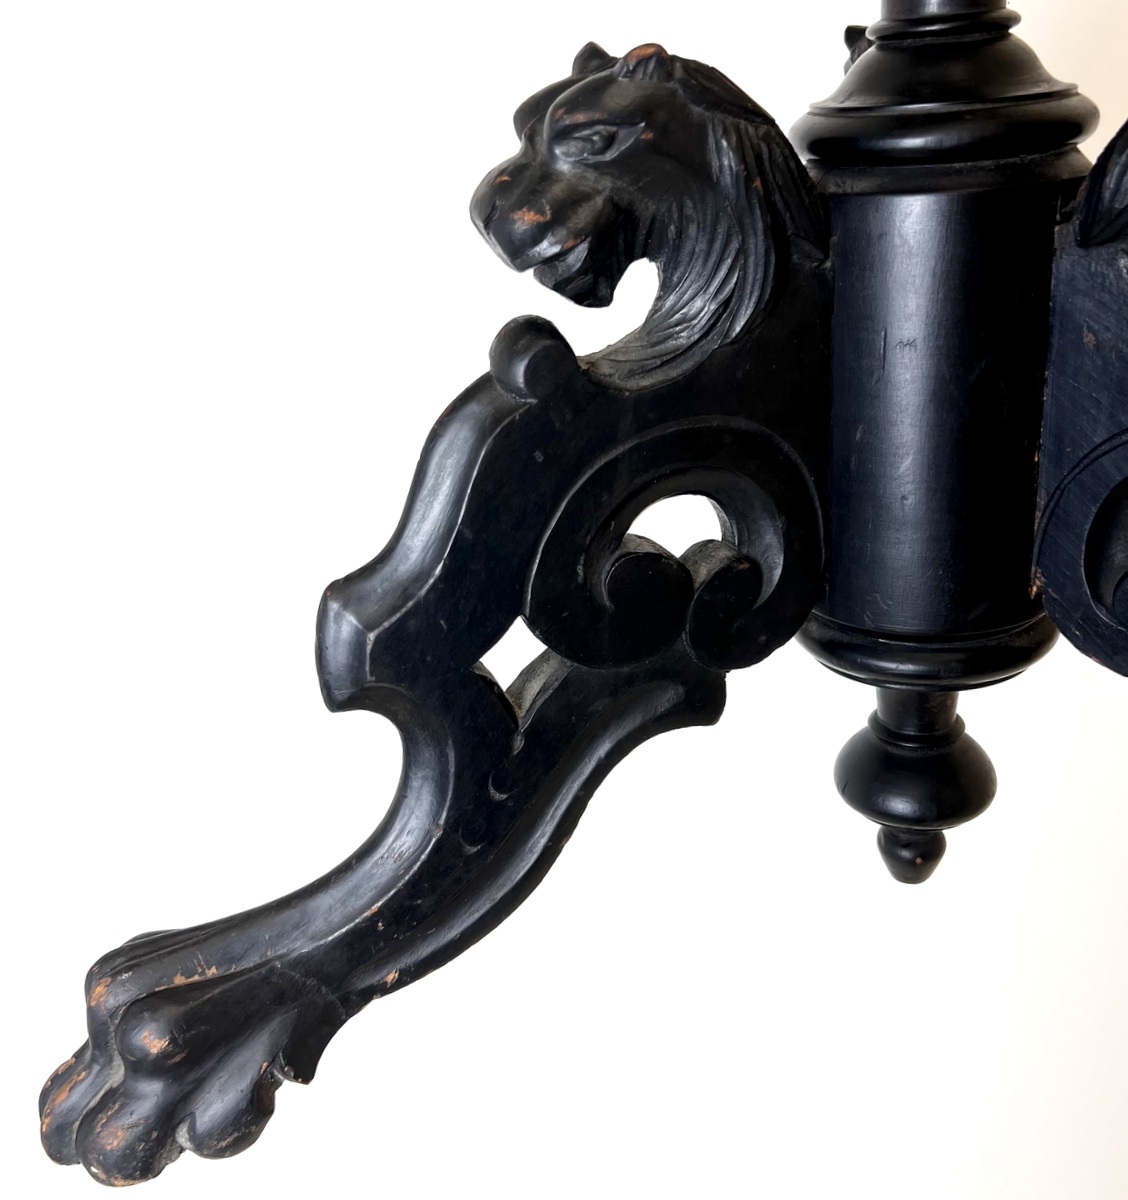 Ebonized Paw-Footed Table